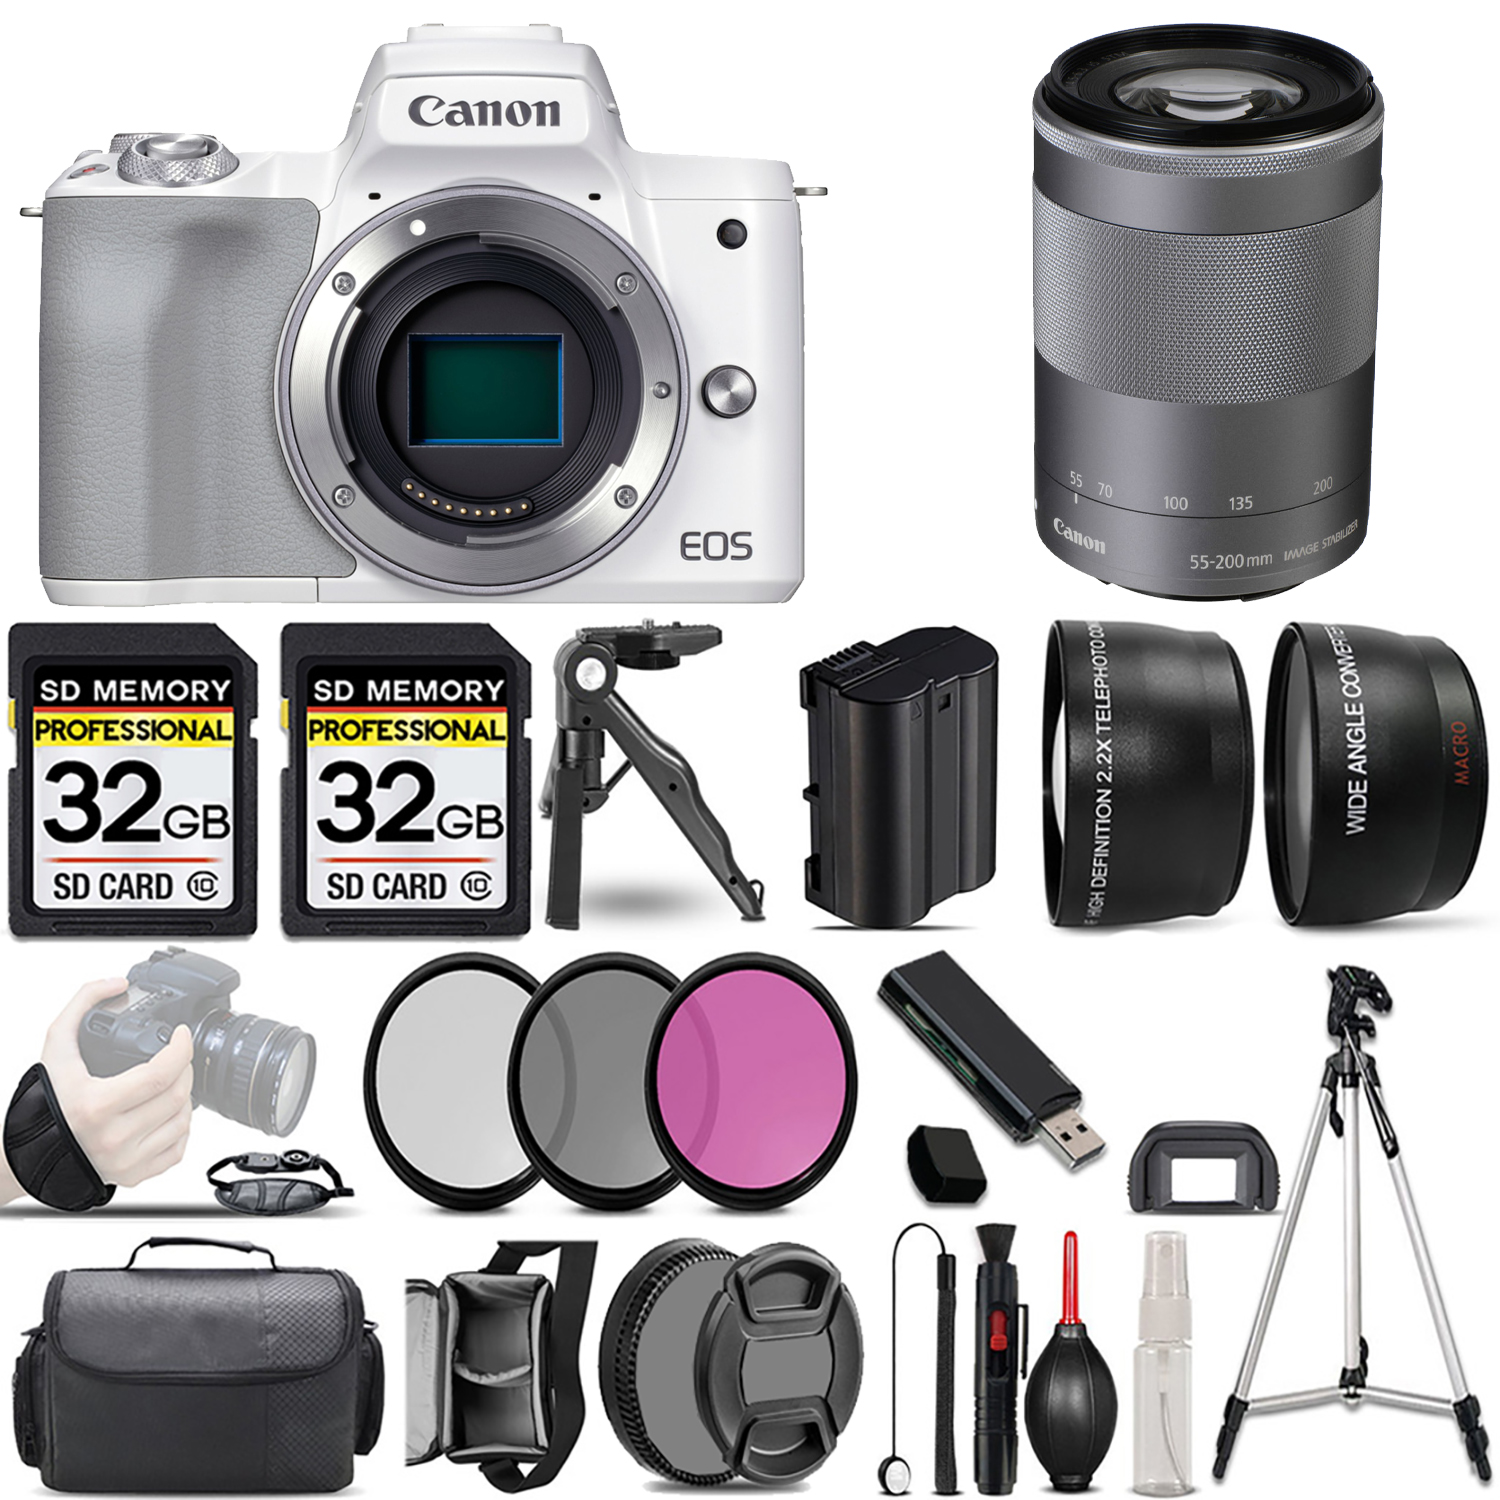 EOS M50 Mark II (White) + 55-200mm IS STM Lens (Silver) + 3 Piece Filter Set + 64GB *FREE SHIPPING*